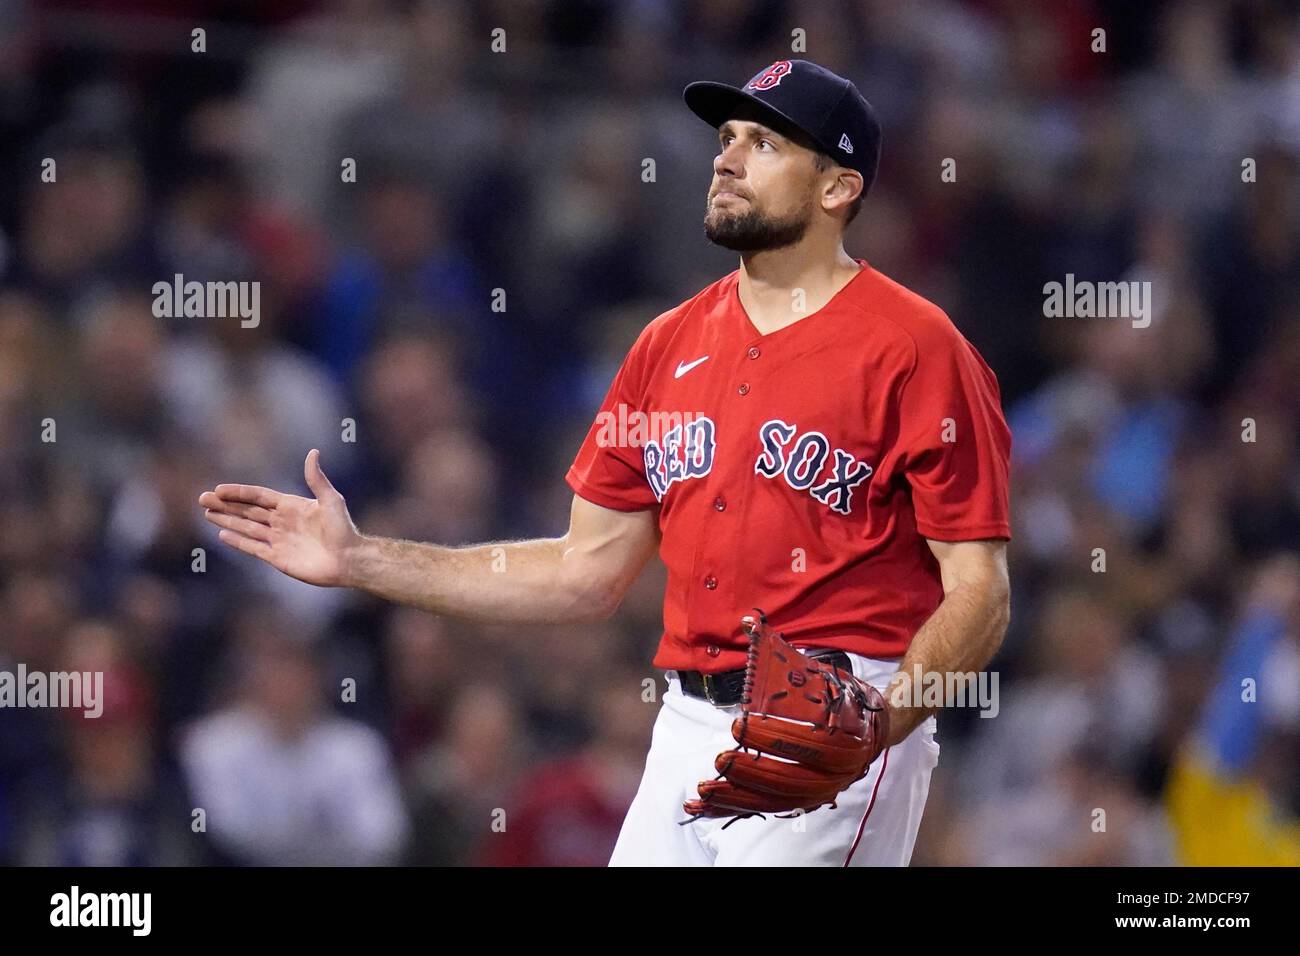 American League Wildcard Game: The legend of Nathan Eovaldi only